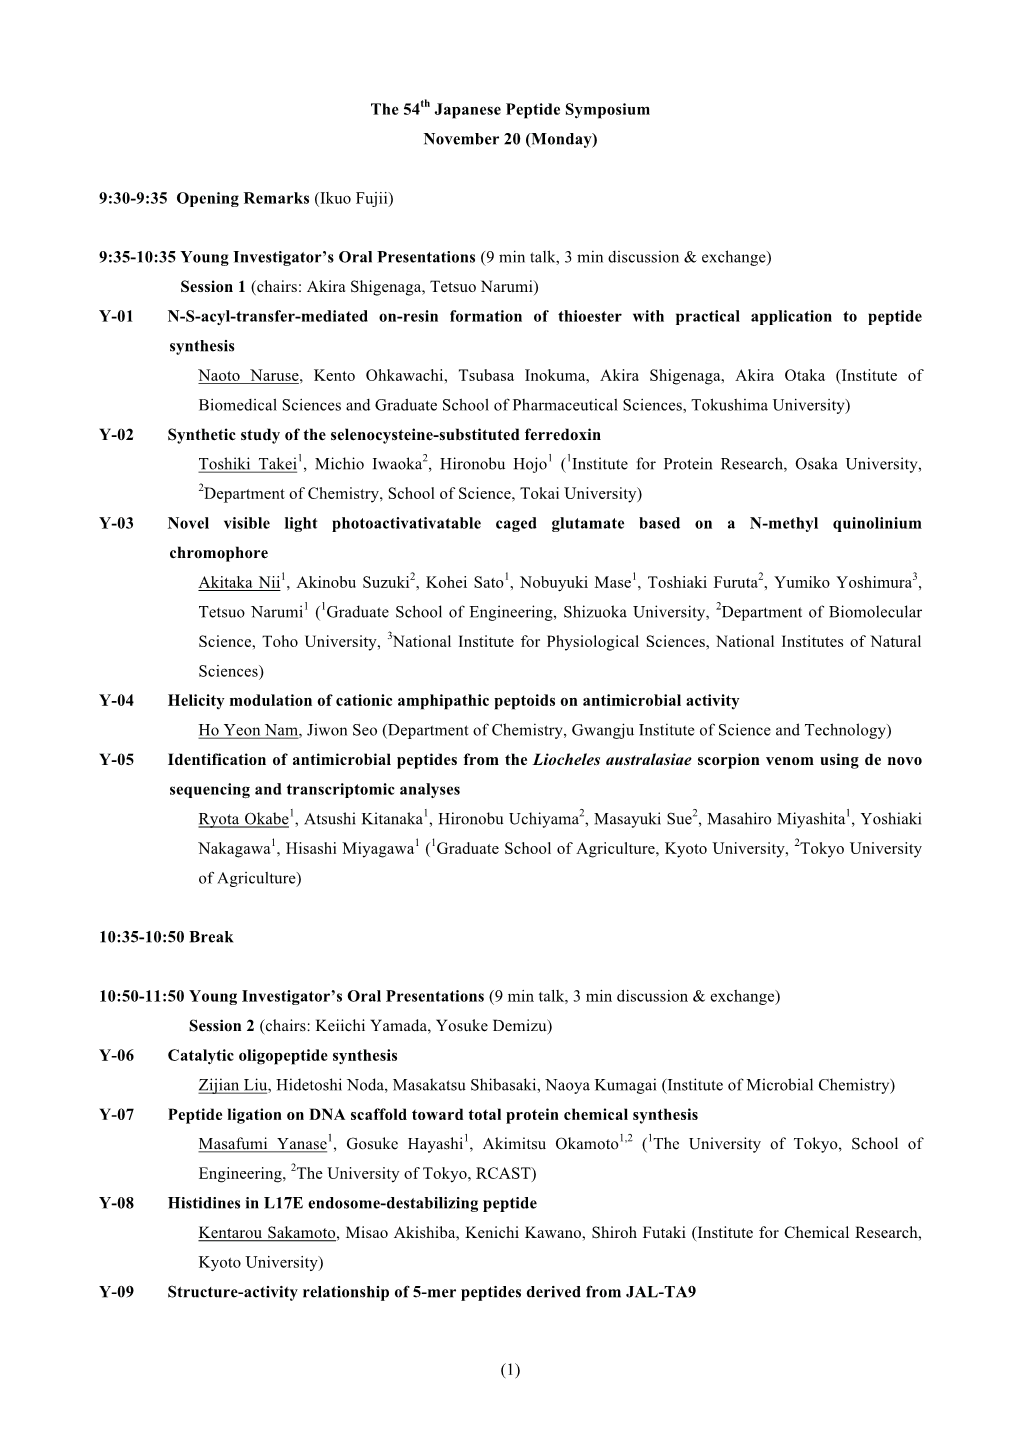 Program of Oral Presentations for the 54Th Japanese Peptide Symposium